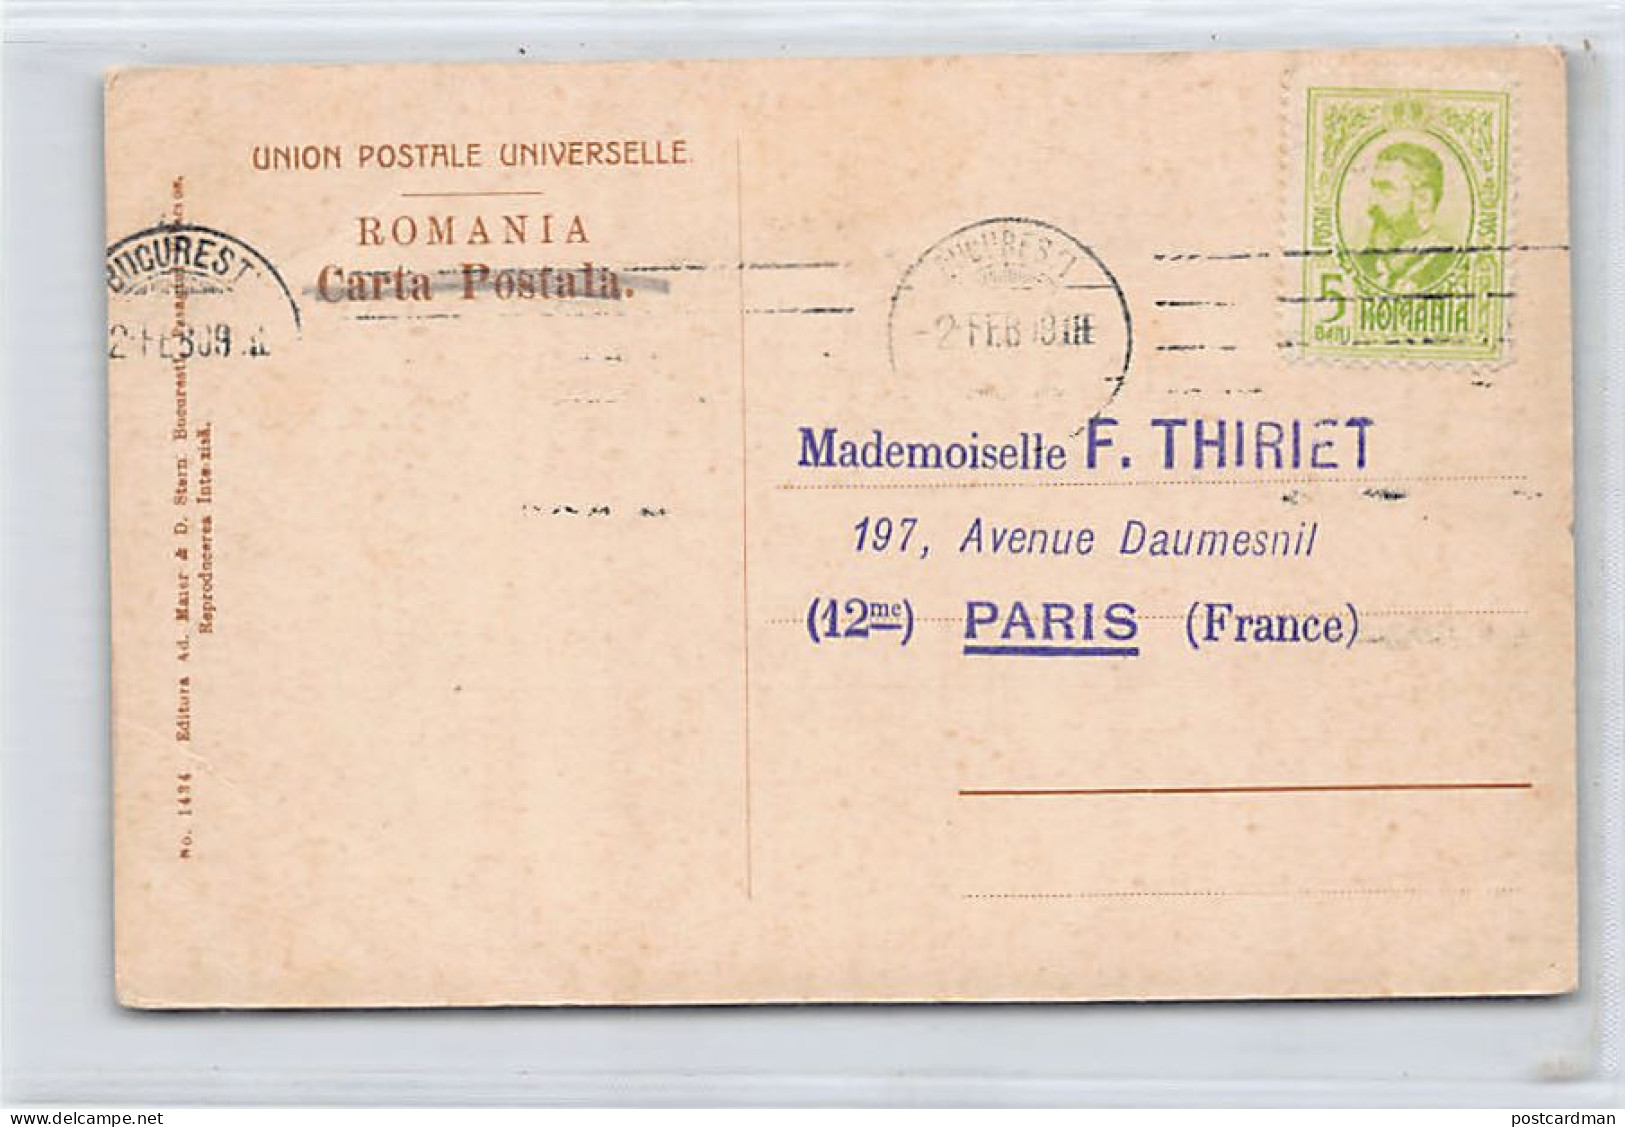 Romania - BUCUREȘTI - Atheneul Roman - SEE SCANS FOR CONDITION - Ed. Ad. Maier & D. Stern 1434 - Roumanie